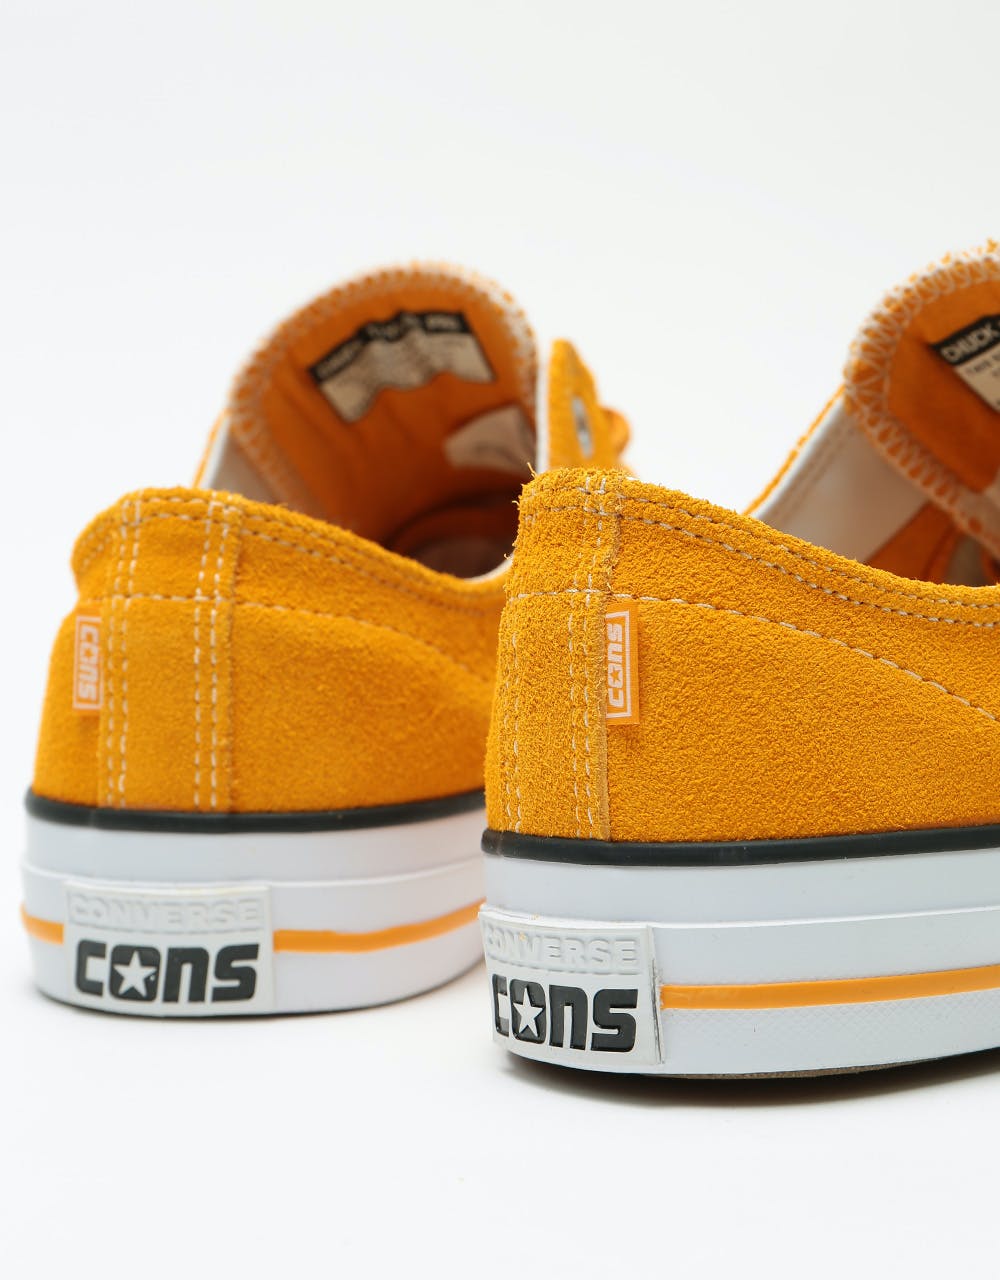 Converse CTAS Pro Ox Suede Skate Shoes - Sunflower Gold/White